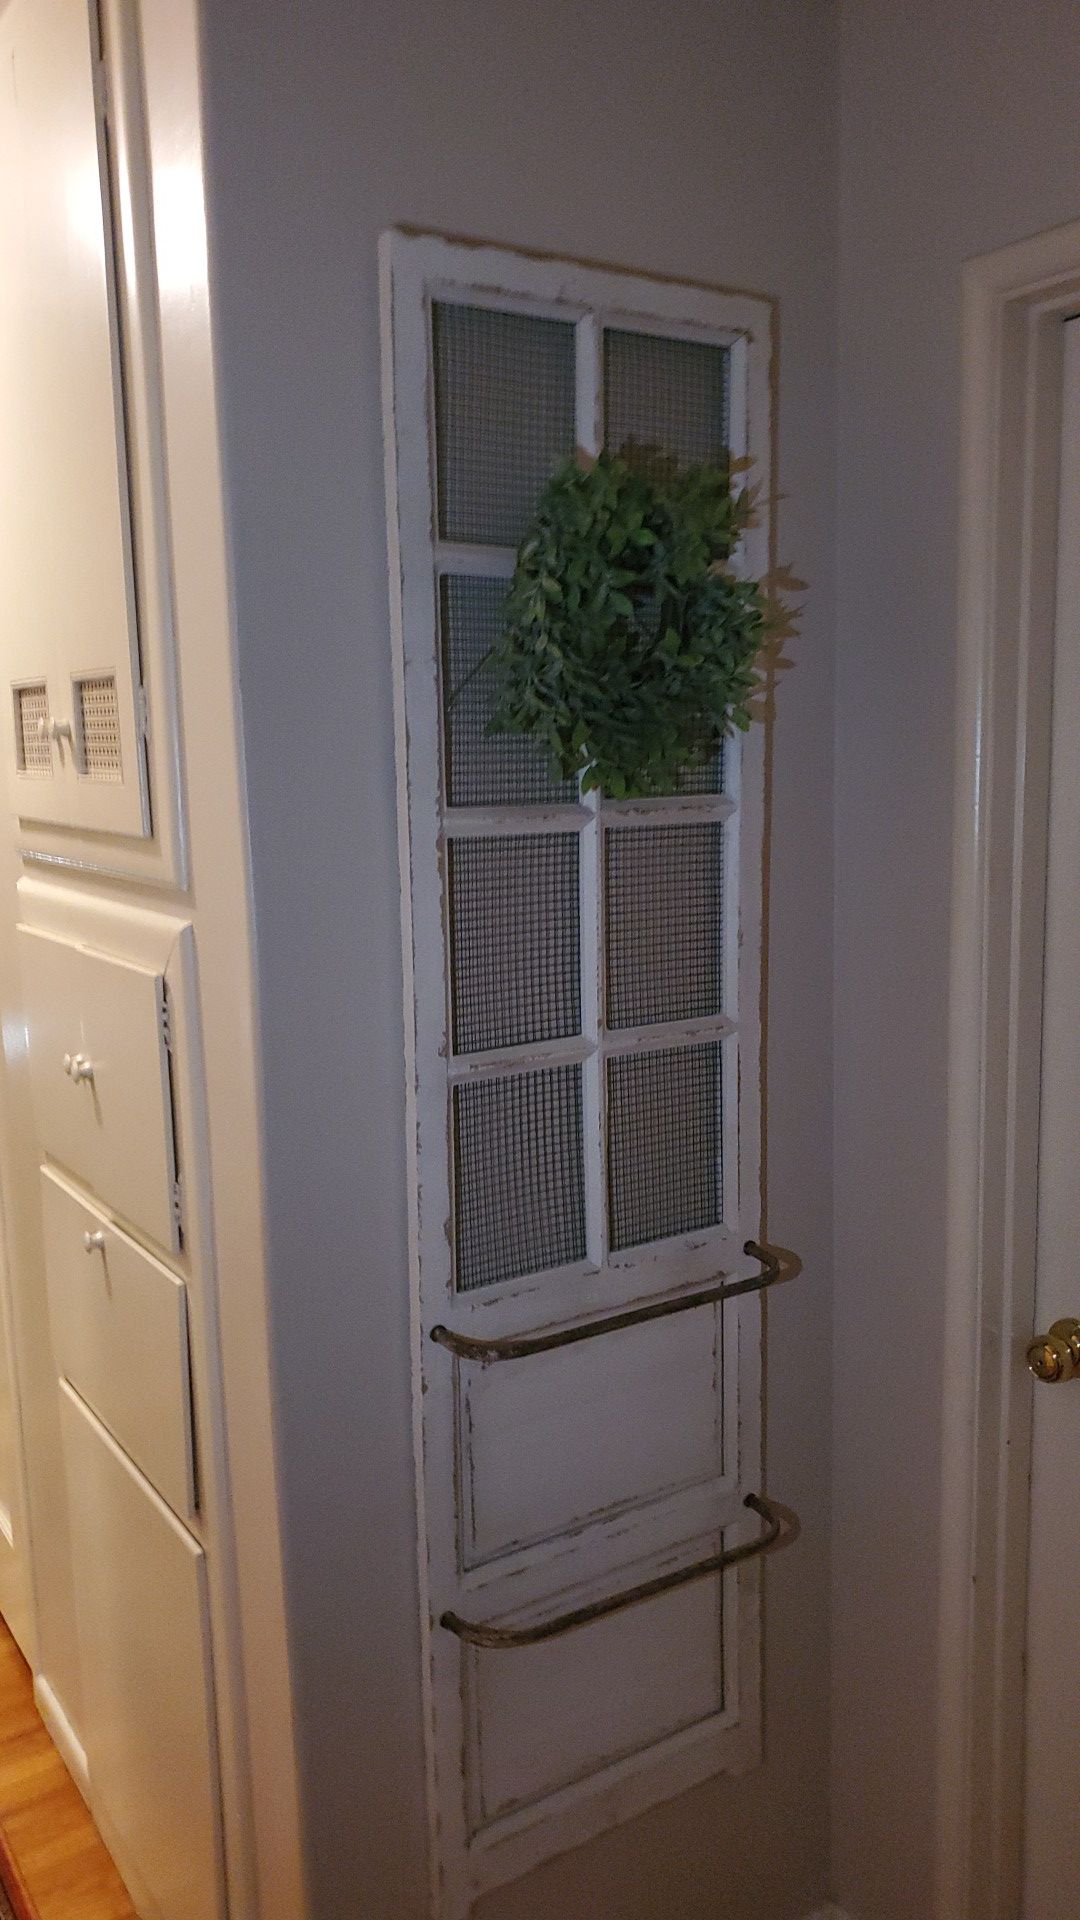 Selling Ashley's furniture door decoration with greenery.